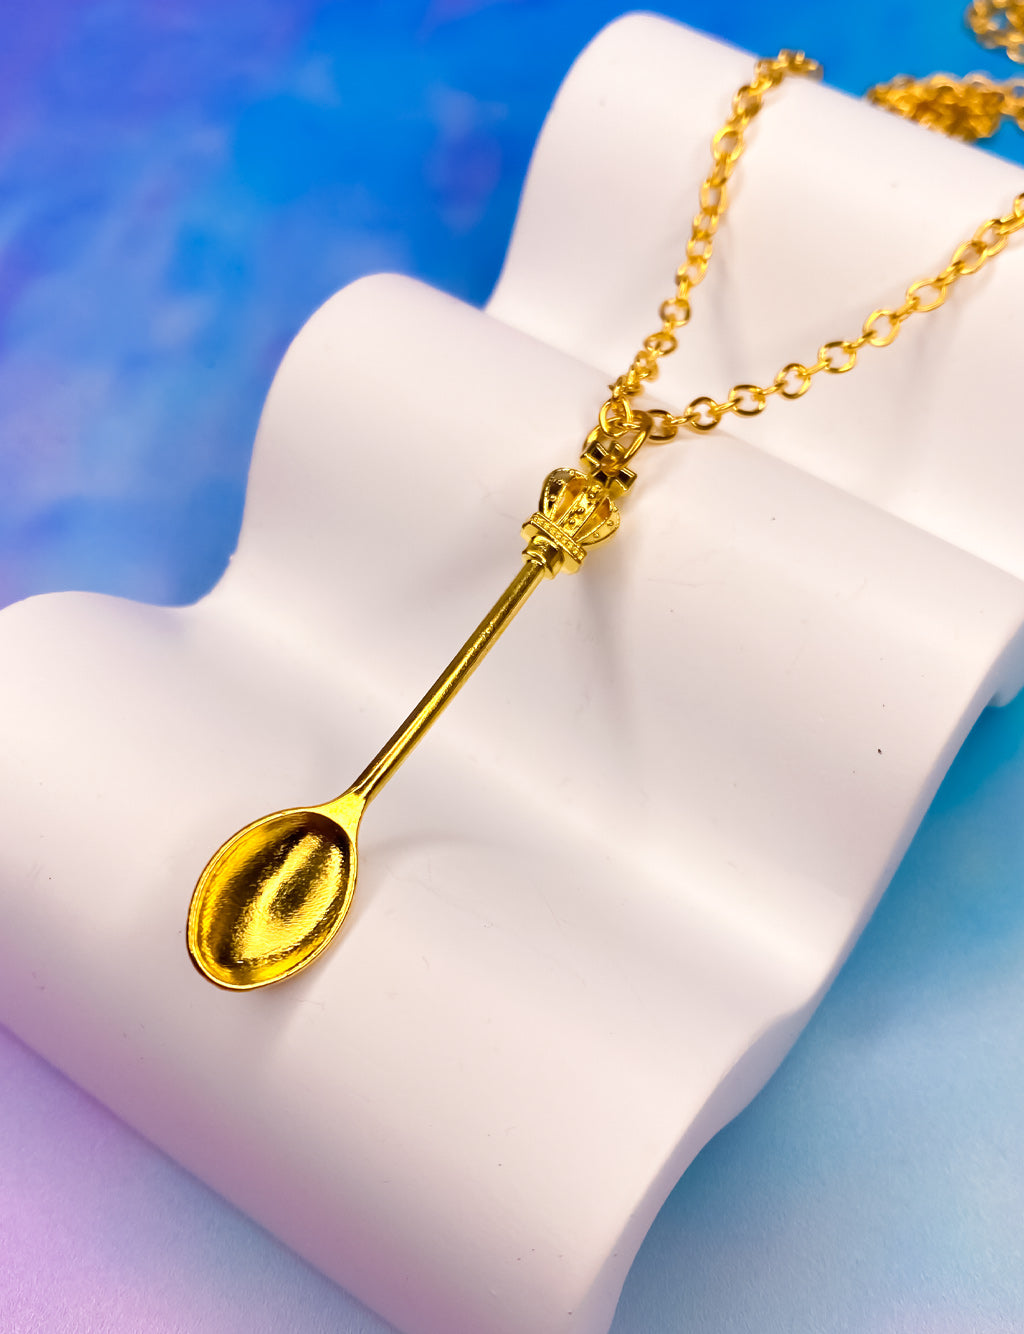 GOLDEN PRINCE SPOON NECKLACE